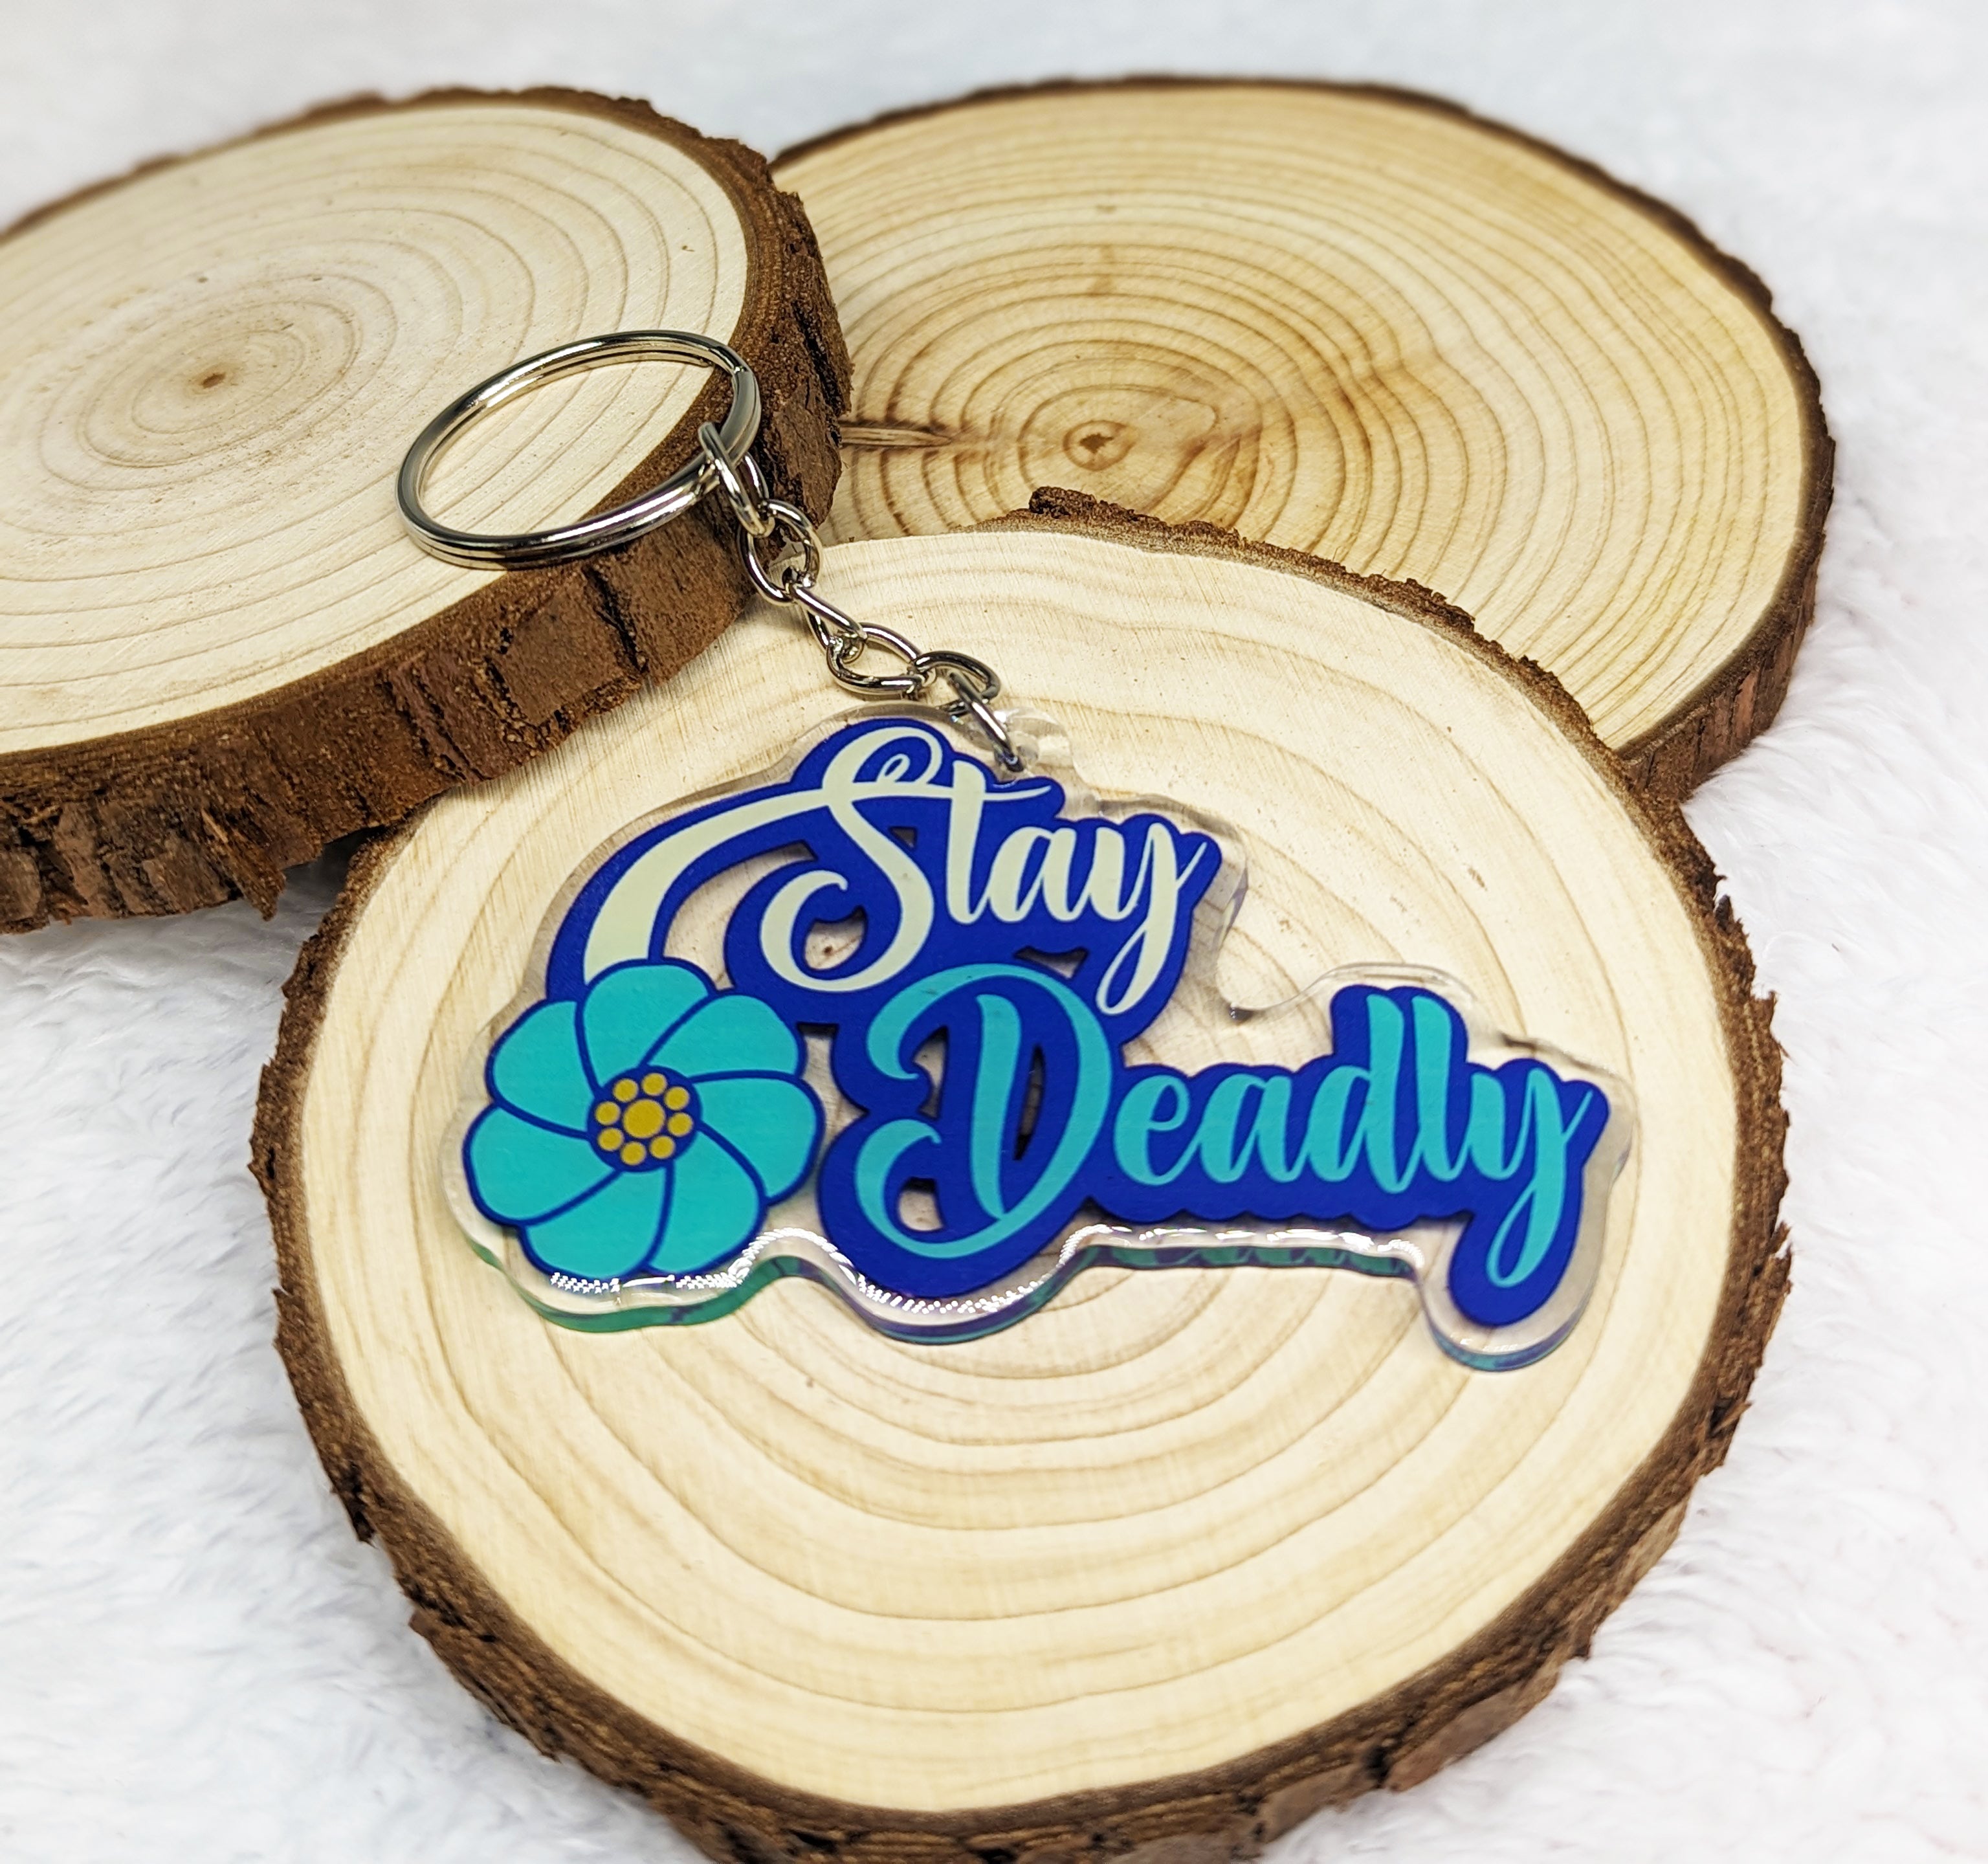 Stay Deadly Key Chain